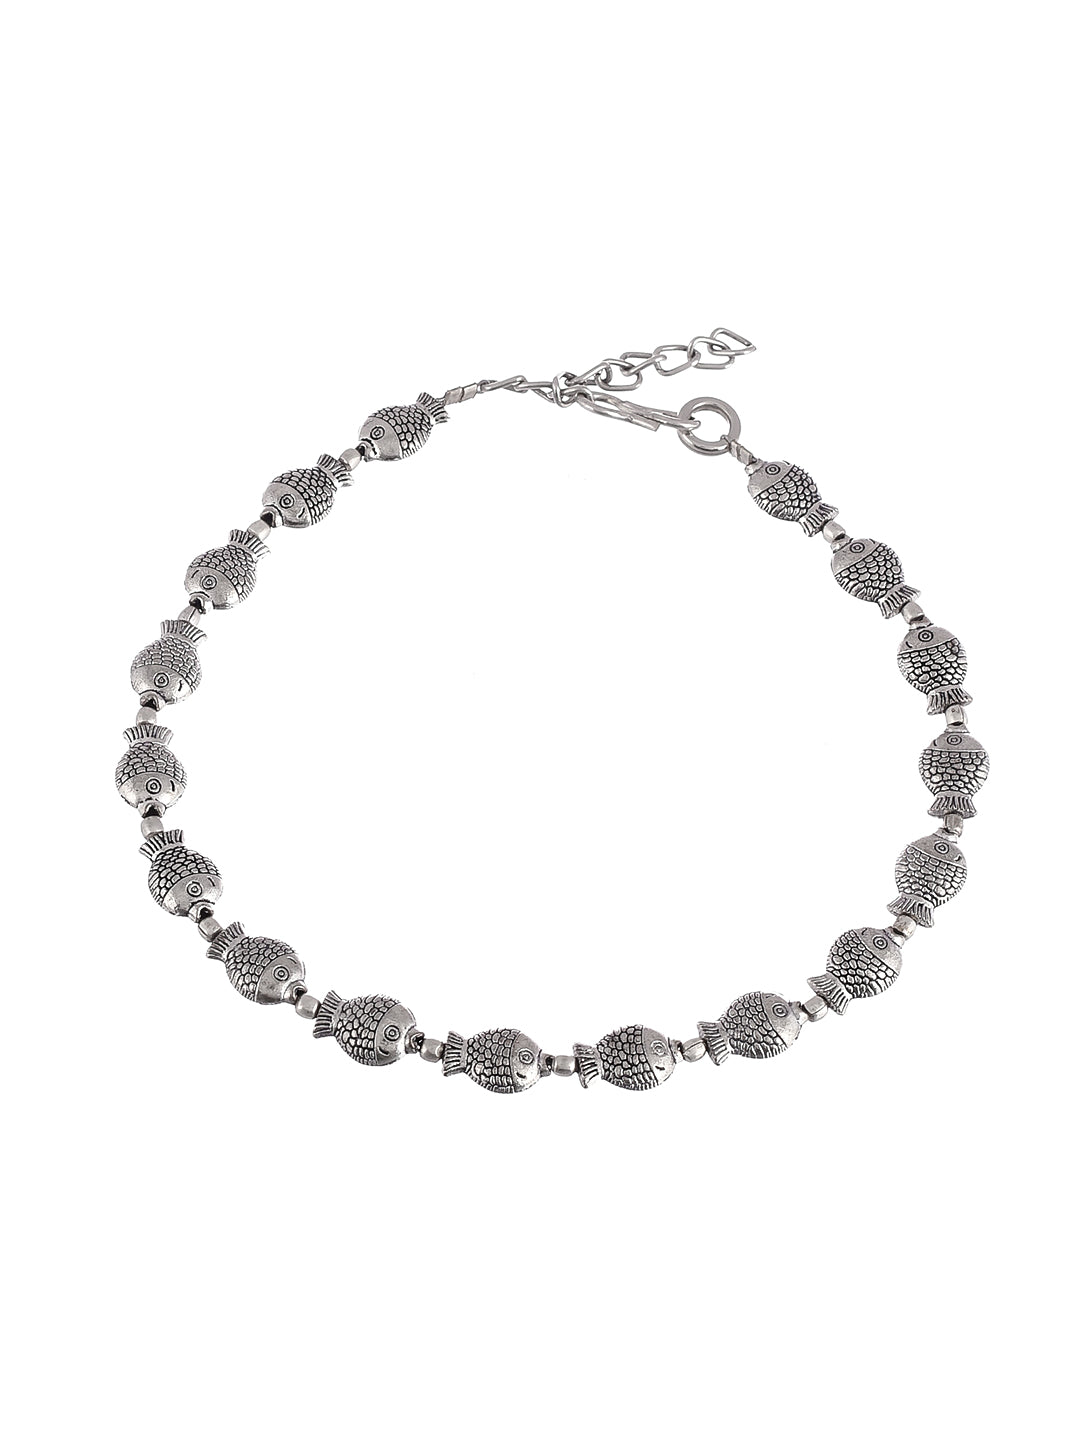 Silver Piscean Fish Anklets